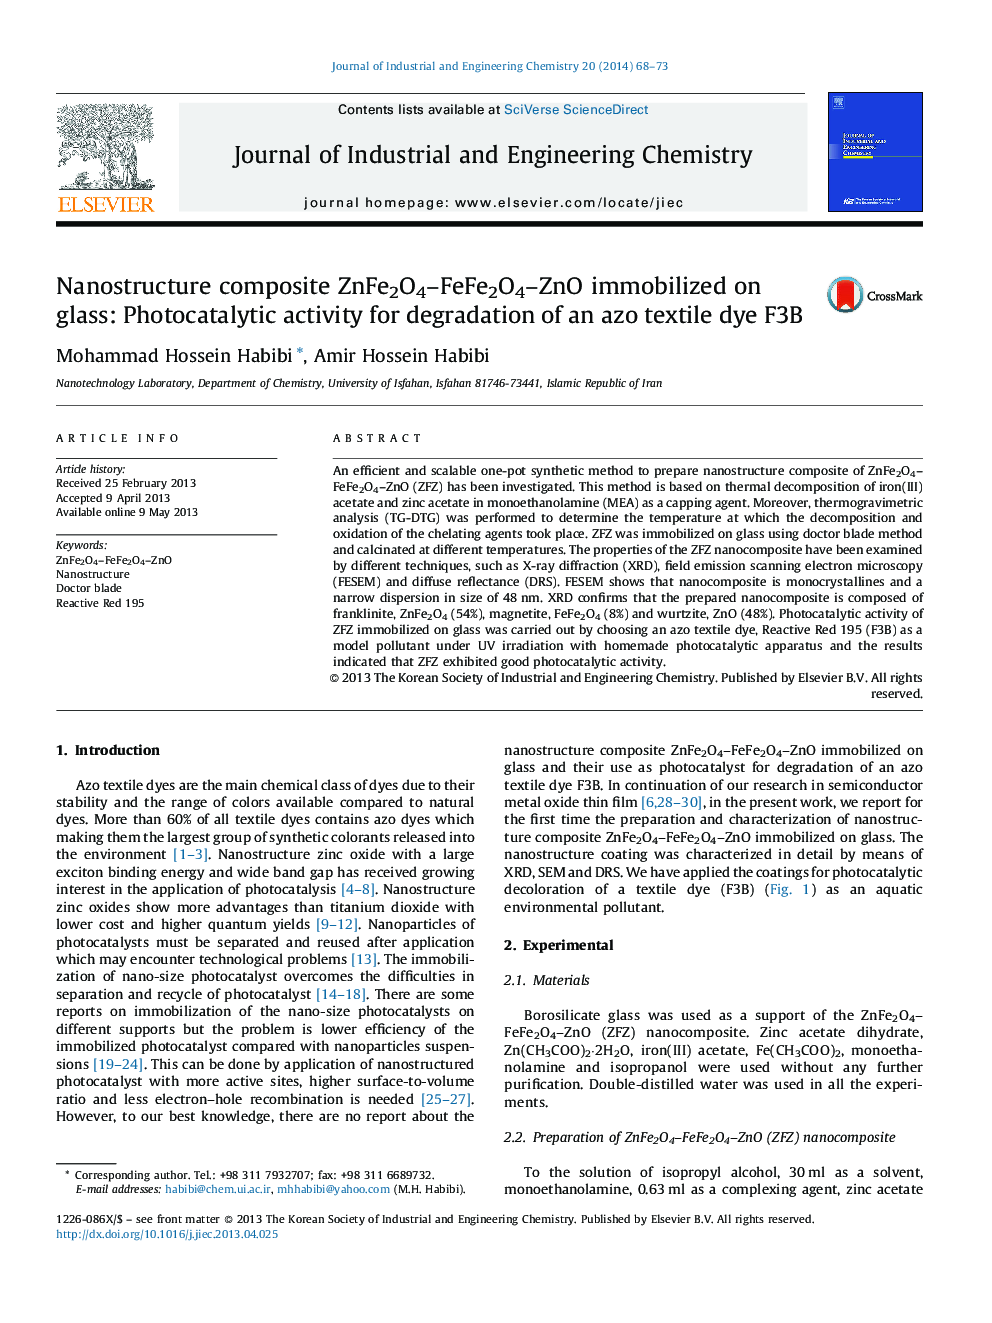 Nanostructure composite ZnFe2O4–FeFe2O4–ZnO immobilized on glass: Photocatalytic activity for degradation of an azo textile dye F3B